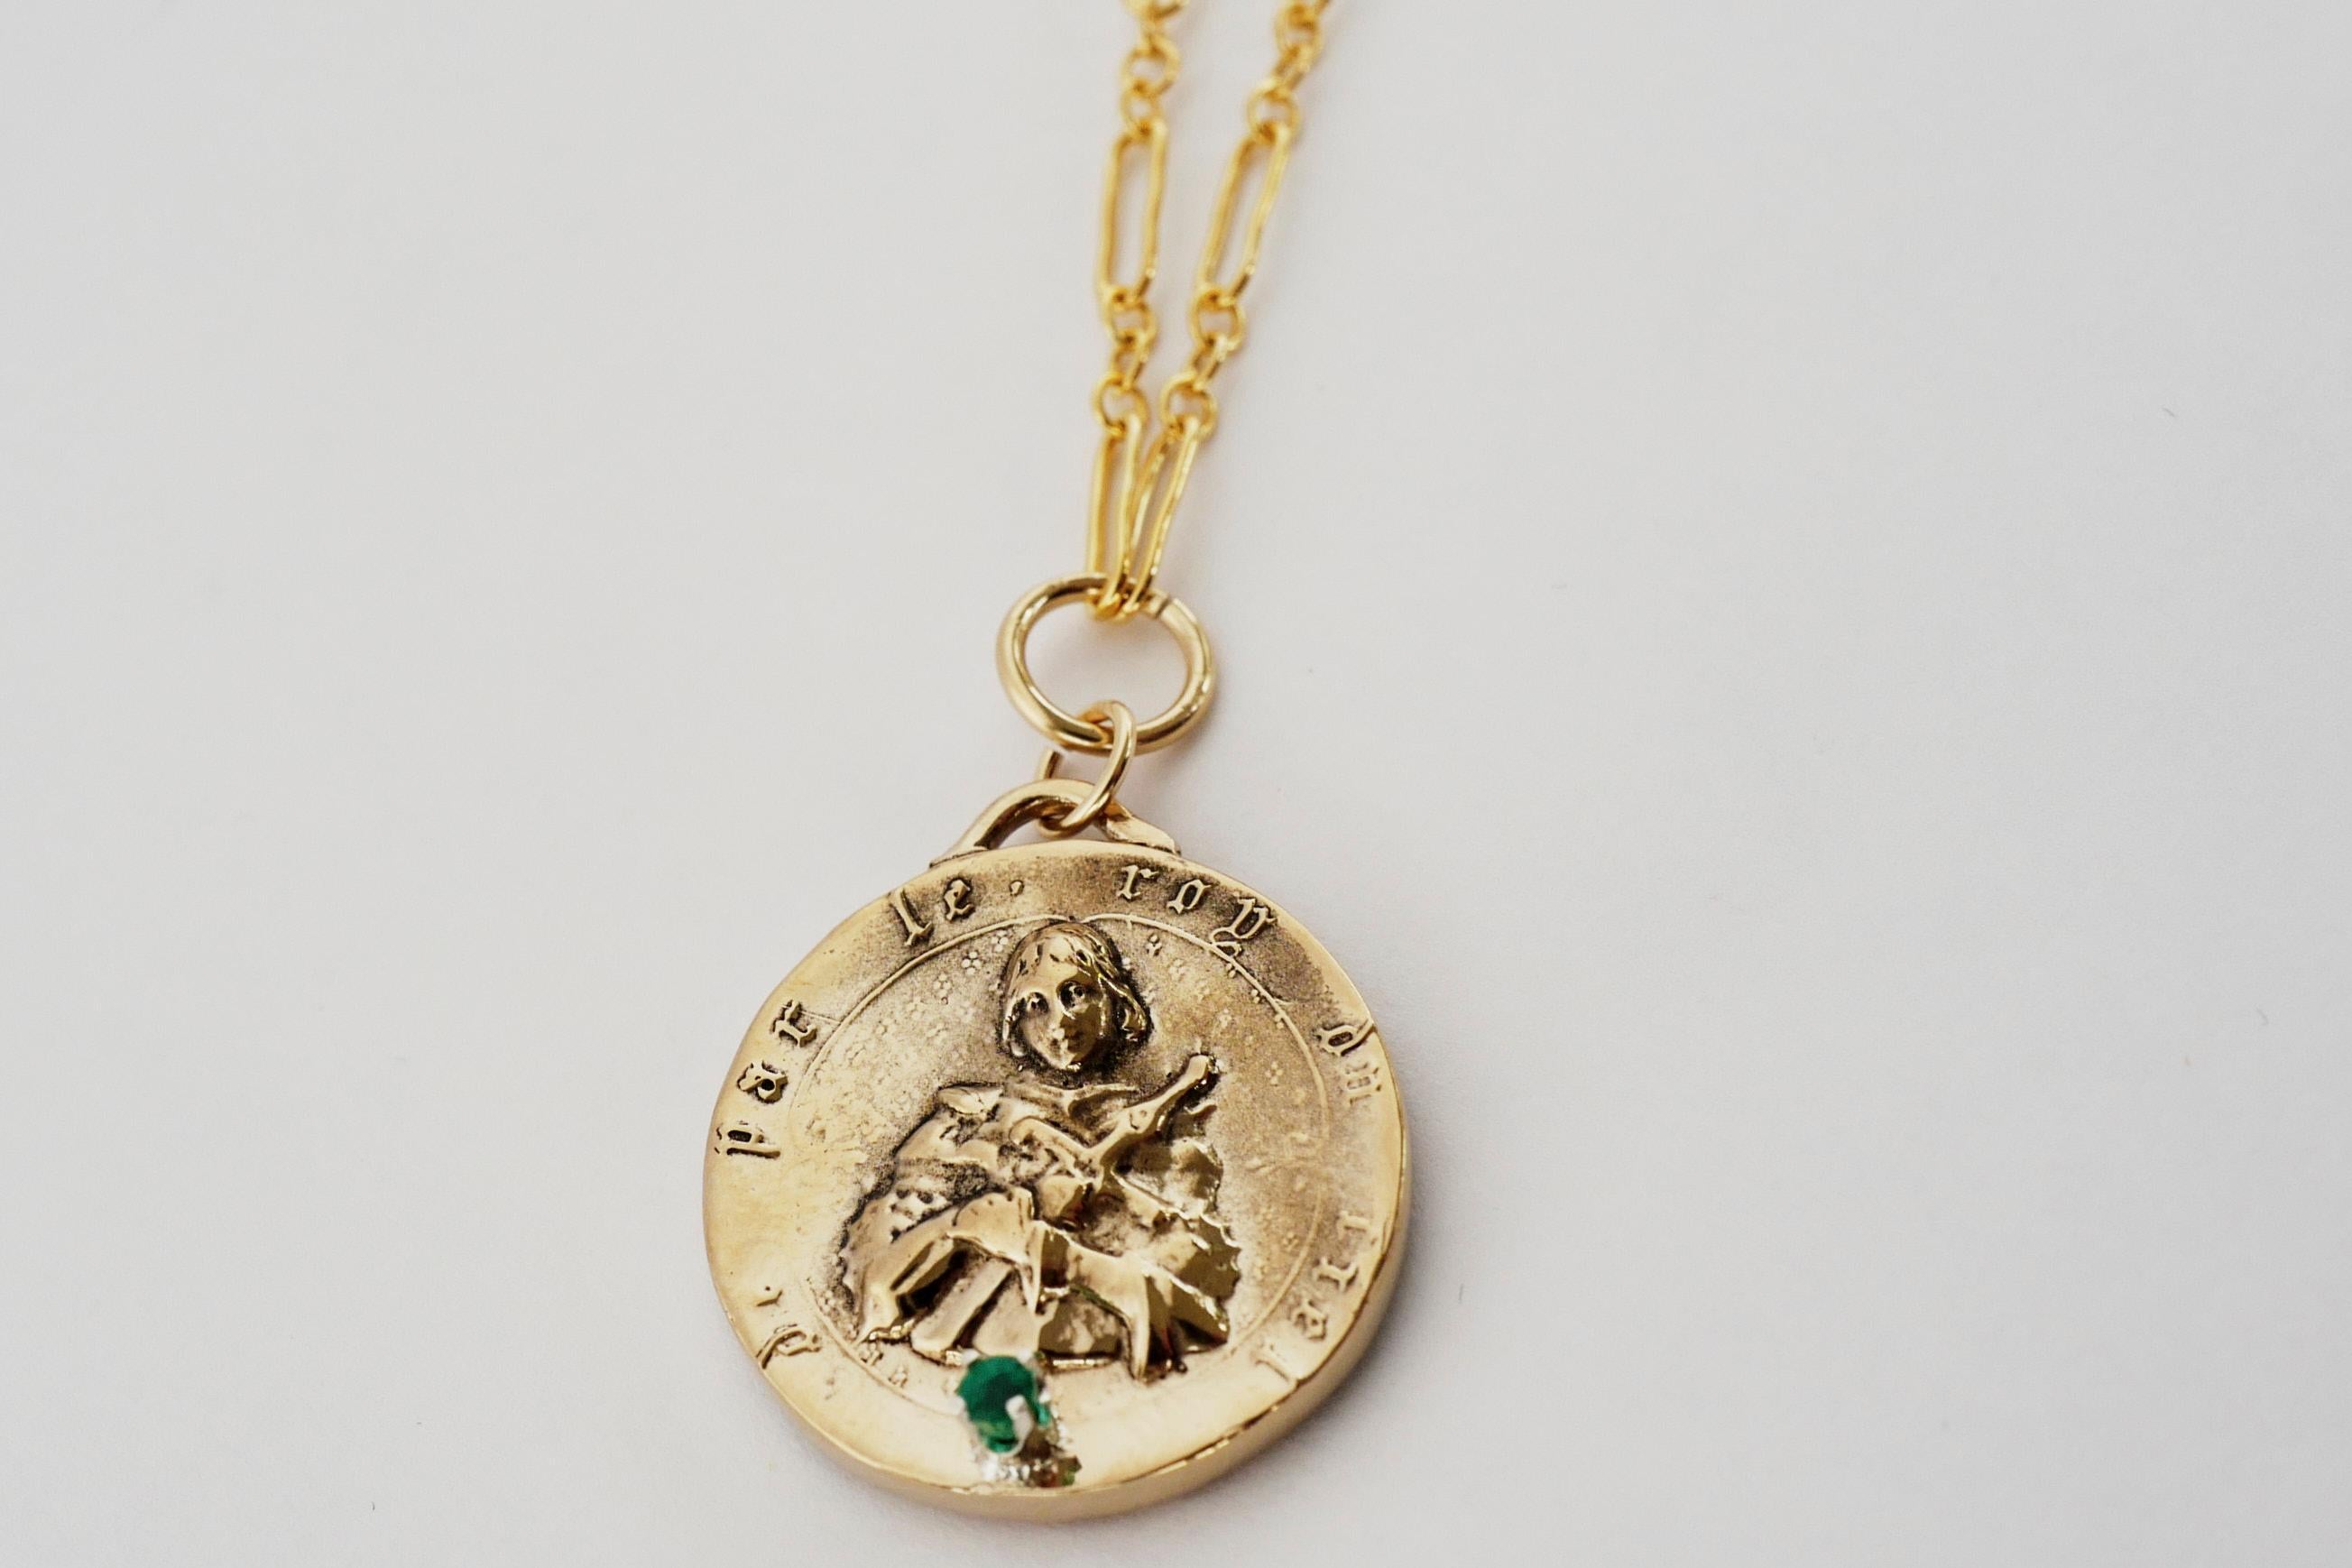 Round Cut Emerald Medal Joan of Arc Chain Necklace Coin Pendant J Dauphin For Sale